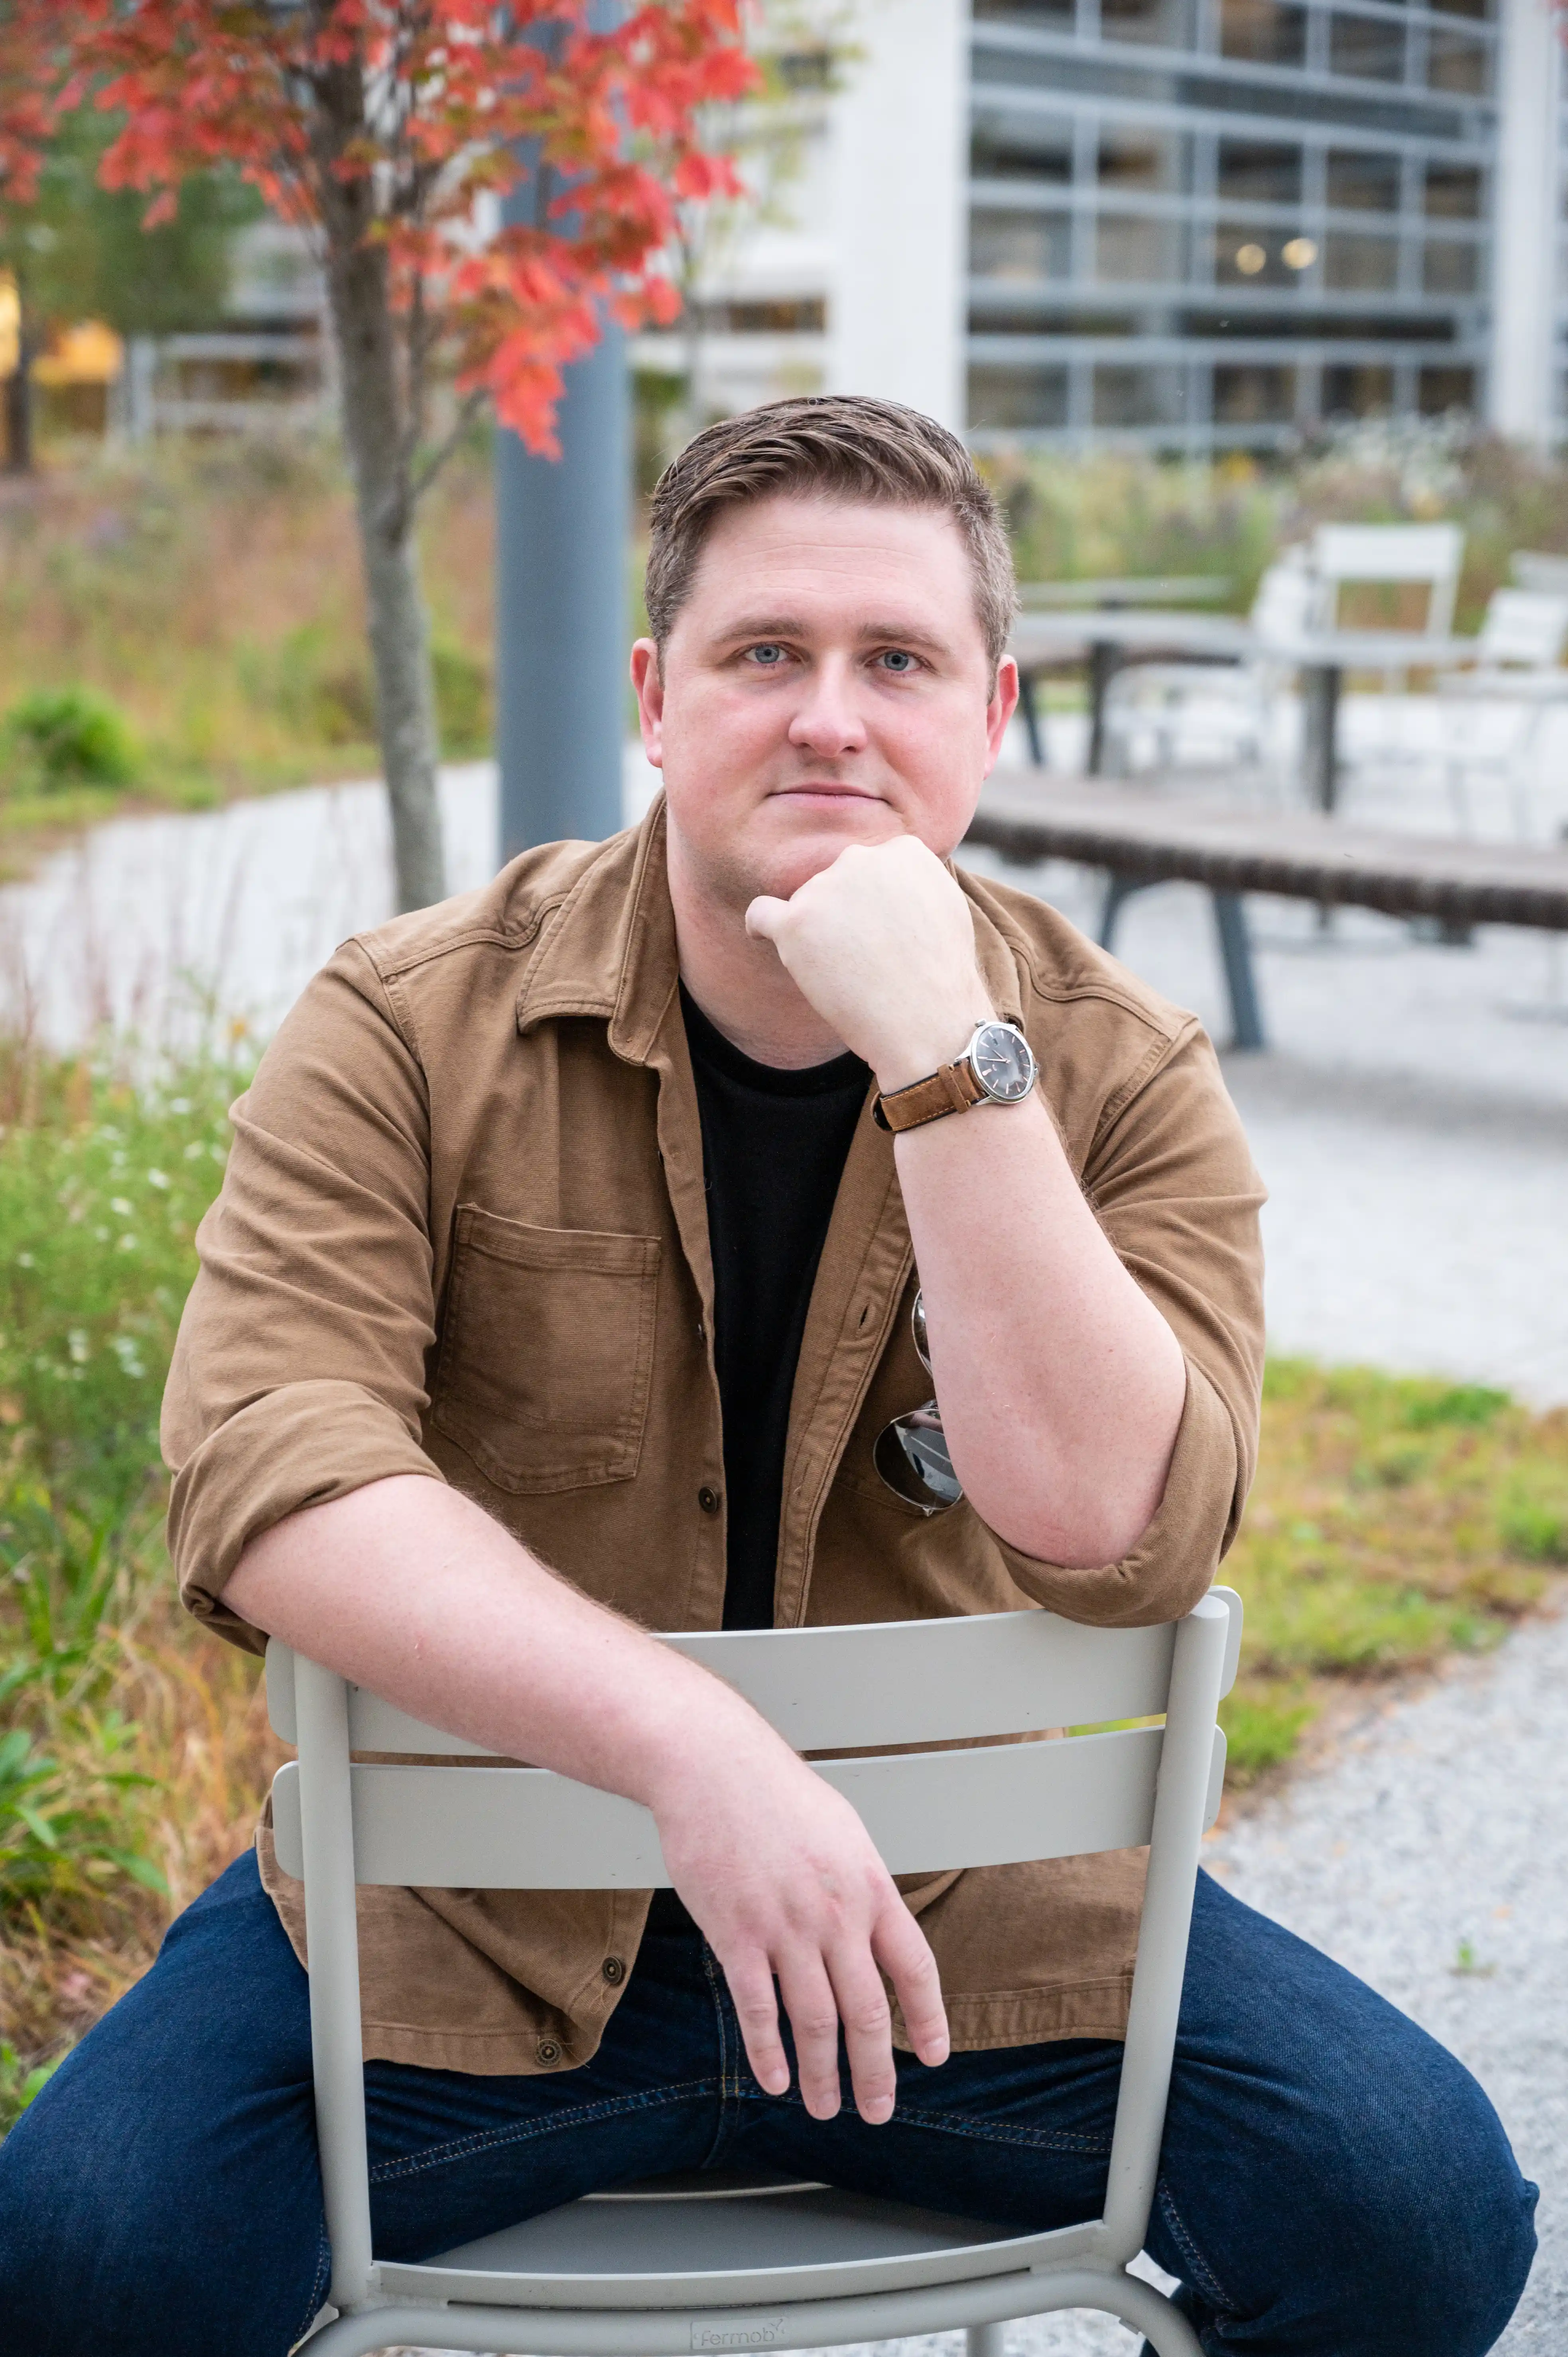 Man sitting on a metal chair outdoors with a thoughtful expression, wearing a brown jacket, black shirt, and blue jeans, with autumn foliage in the background.